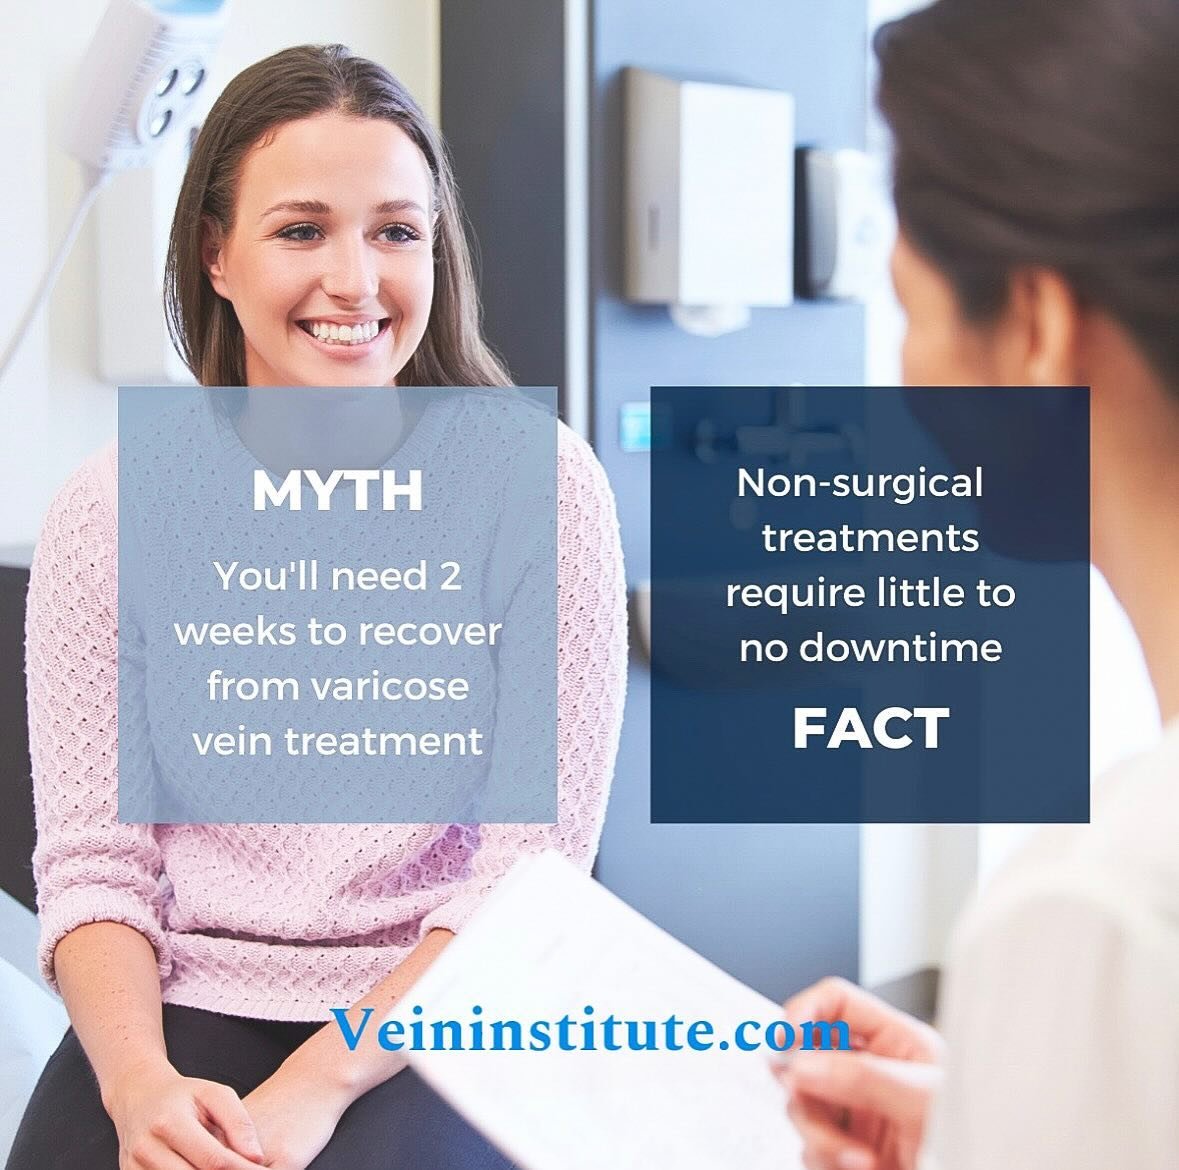 Myth: Varicose vein treatment means two weeks of recovery?🧐

Fact: False! Many treatments require minimal downtime, allowing you to be in and out and back to work the same day.

Ready to learn more?

➡️ Visit us at veininstitute.com
➡️ Call us at 20